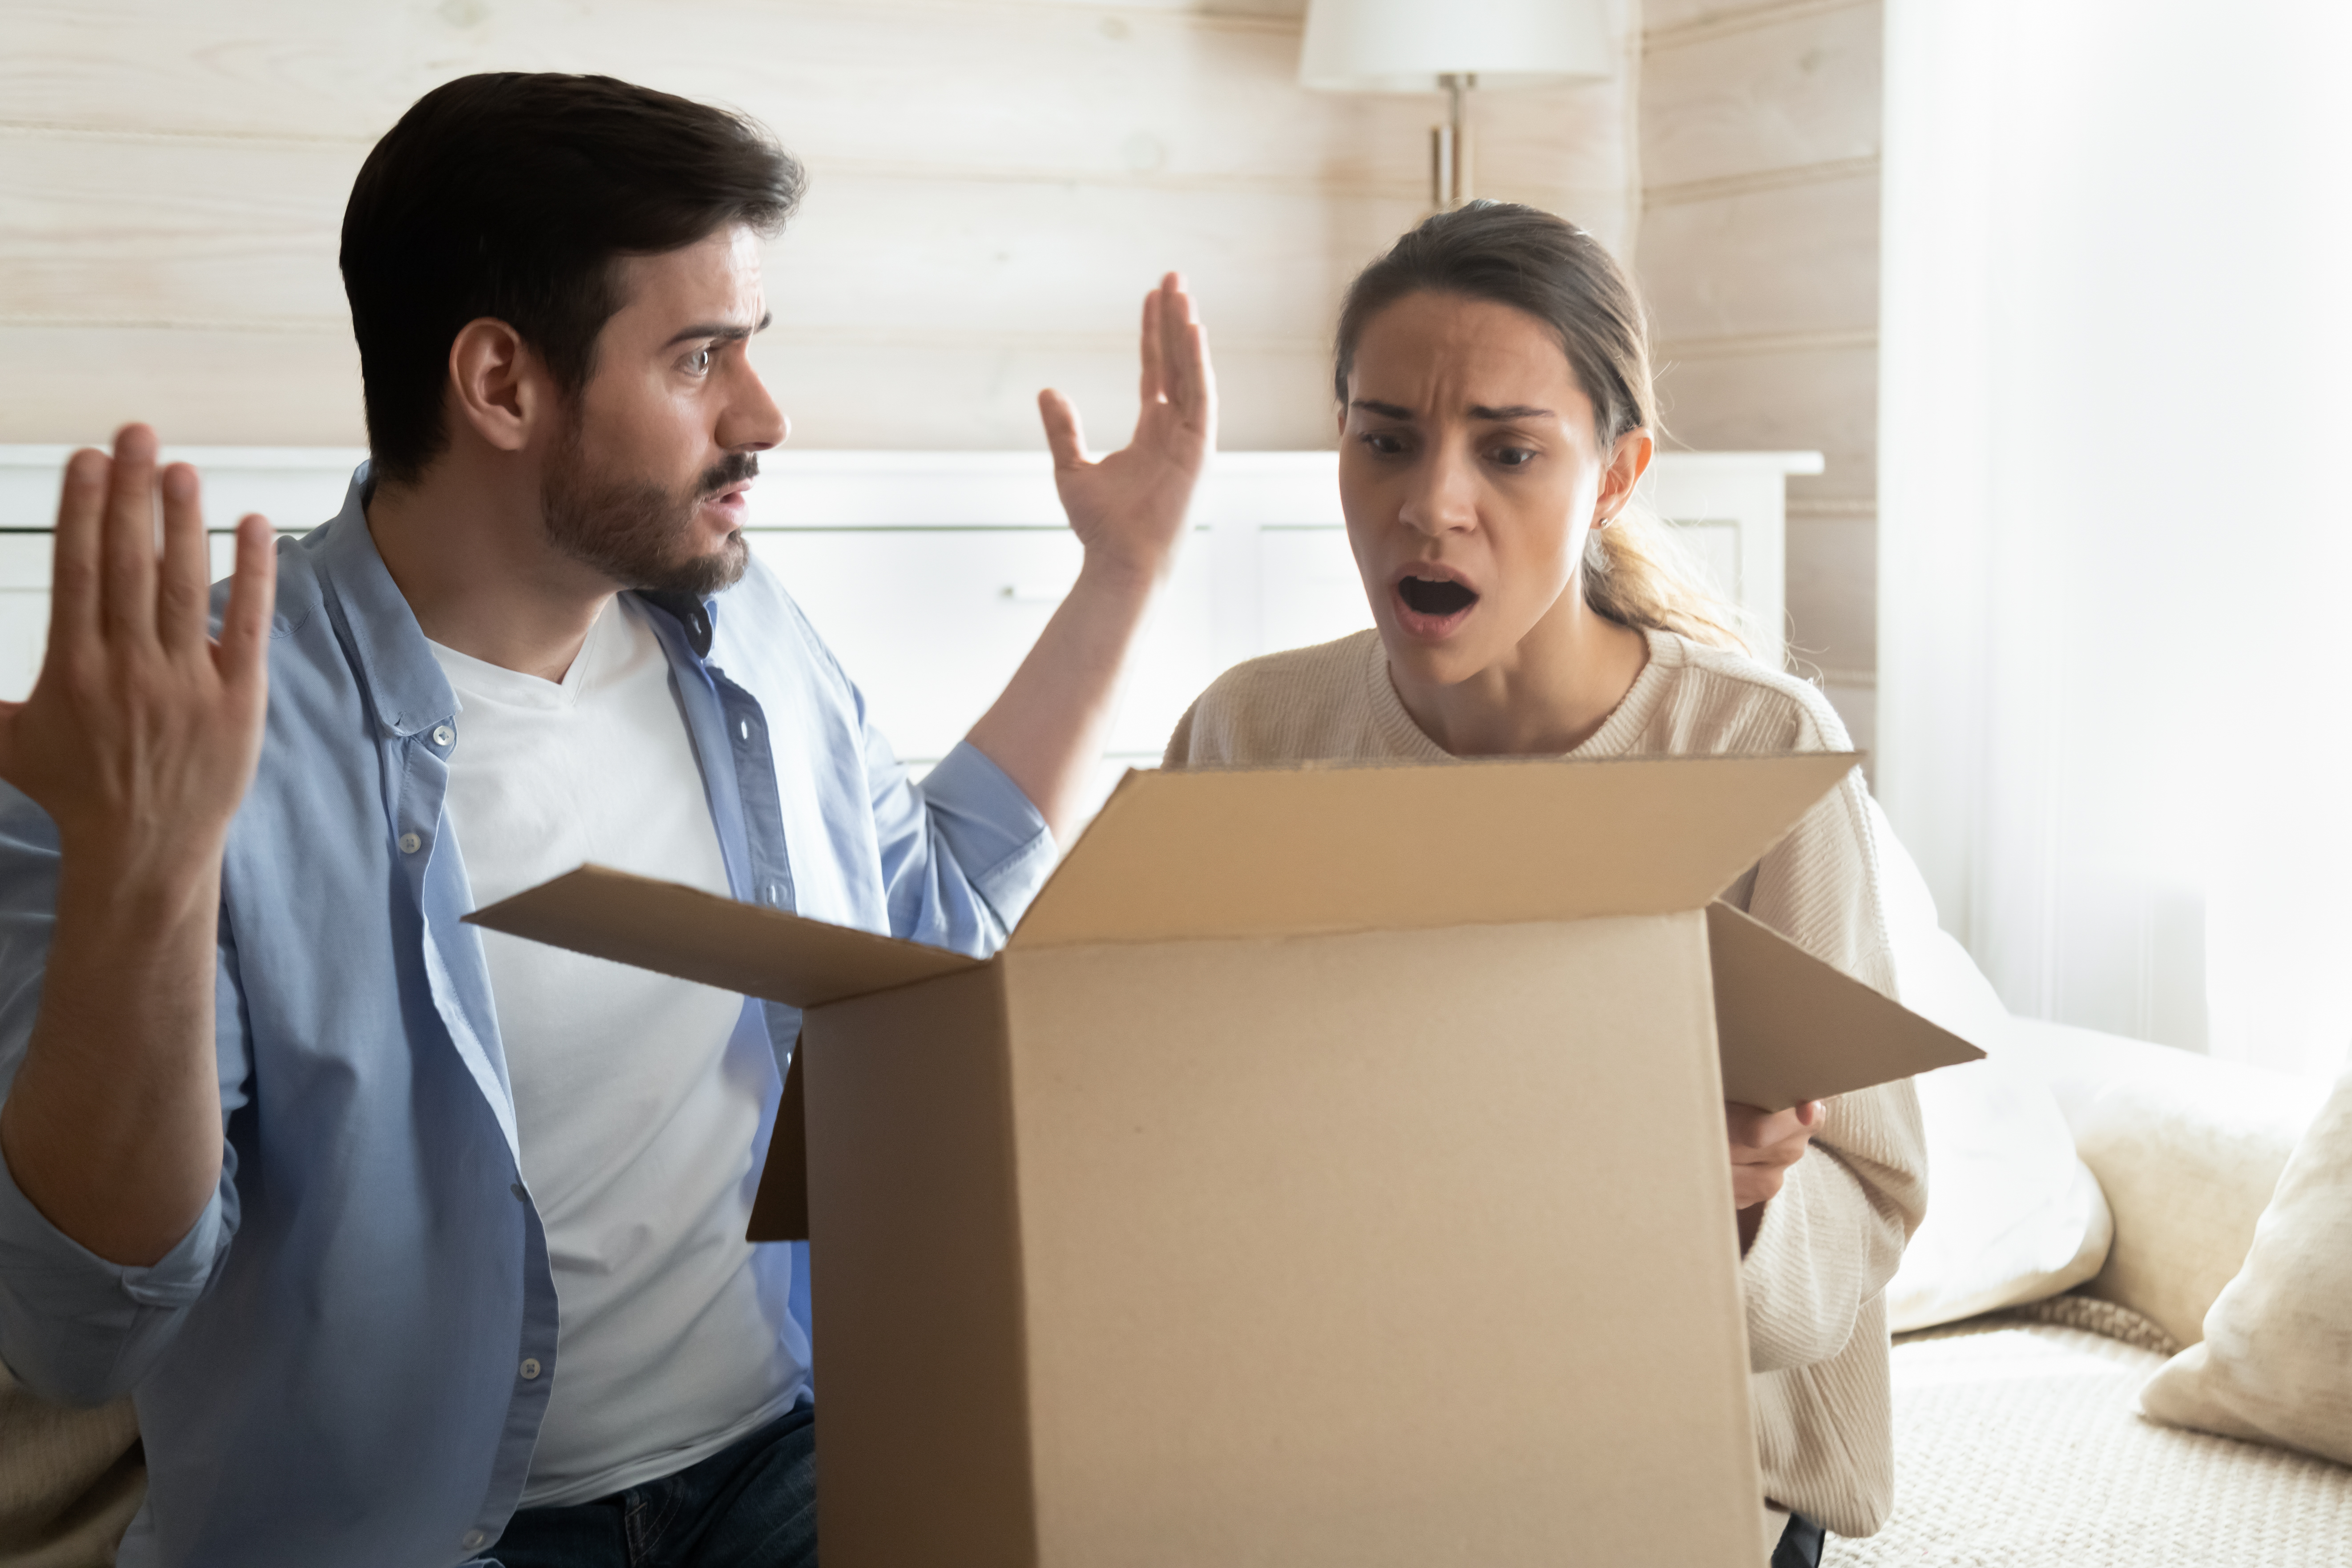 Man and woman in disbelief looking at a cardboard box